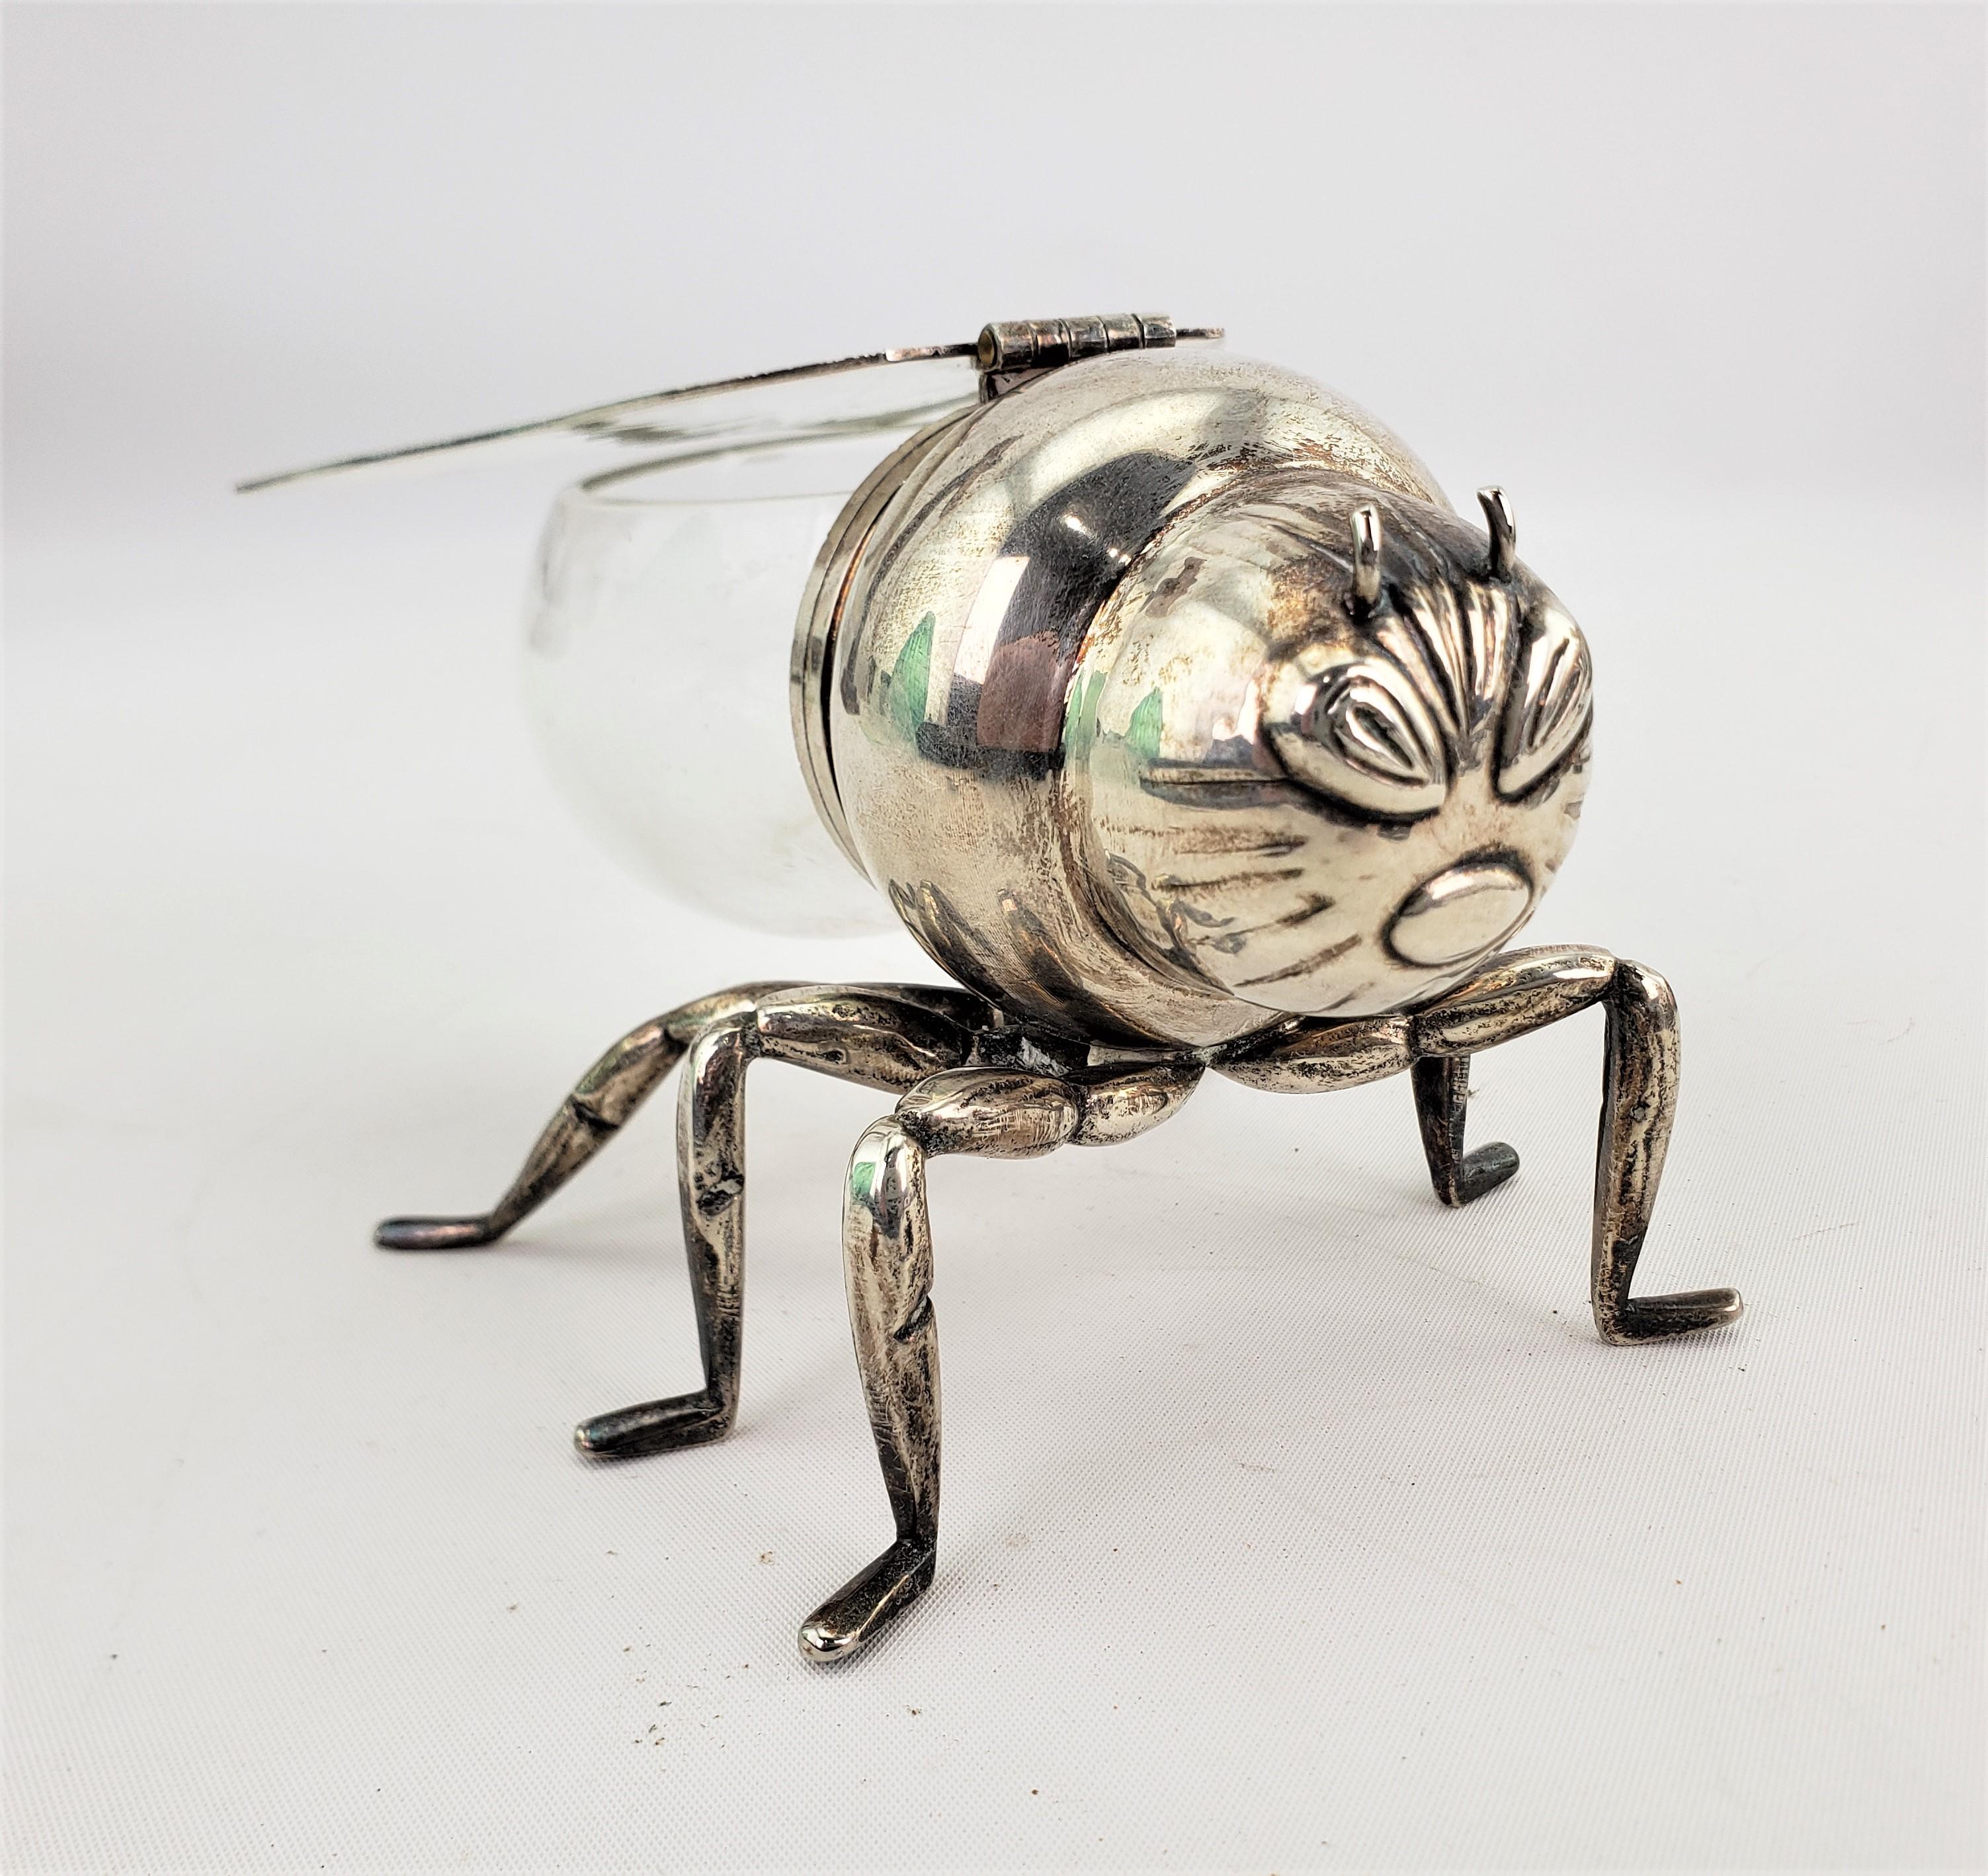 This antique silver plated and glass figural condiment server is unsigned, but presumed to have been made in England in approximately 1890-1900 in the period Victorian style. The silver plated and glass server is a stylized figural bee or wasp with